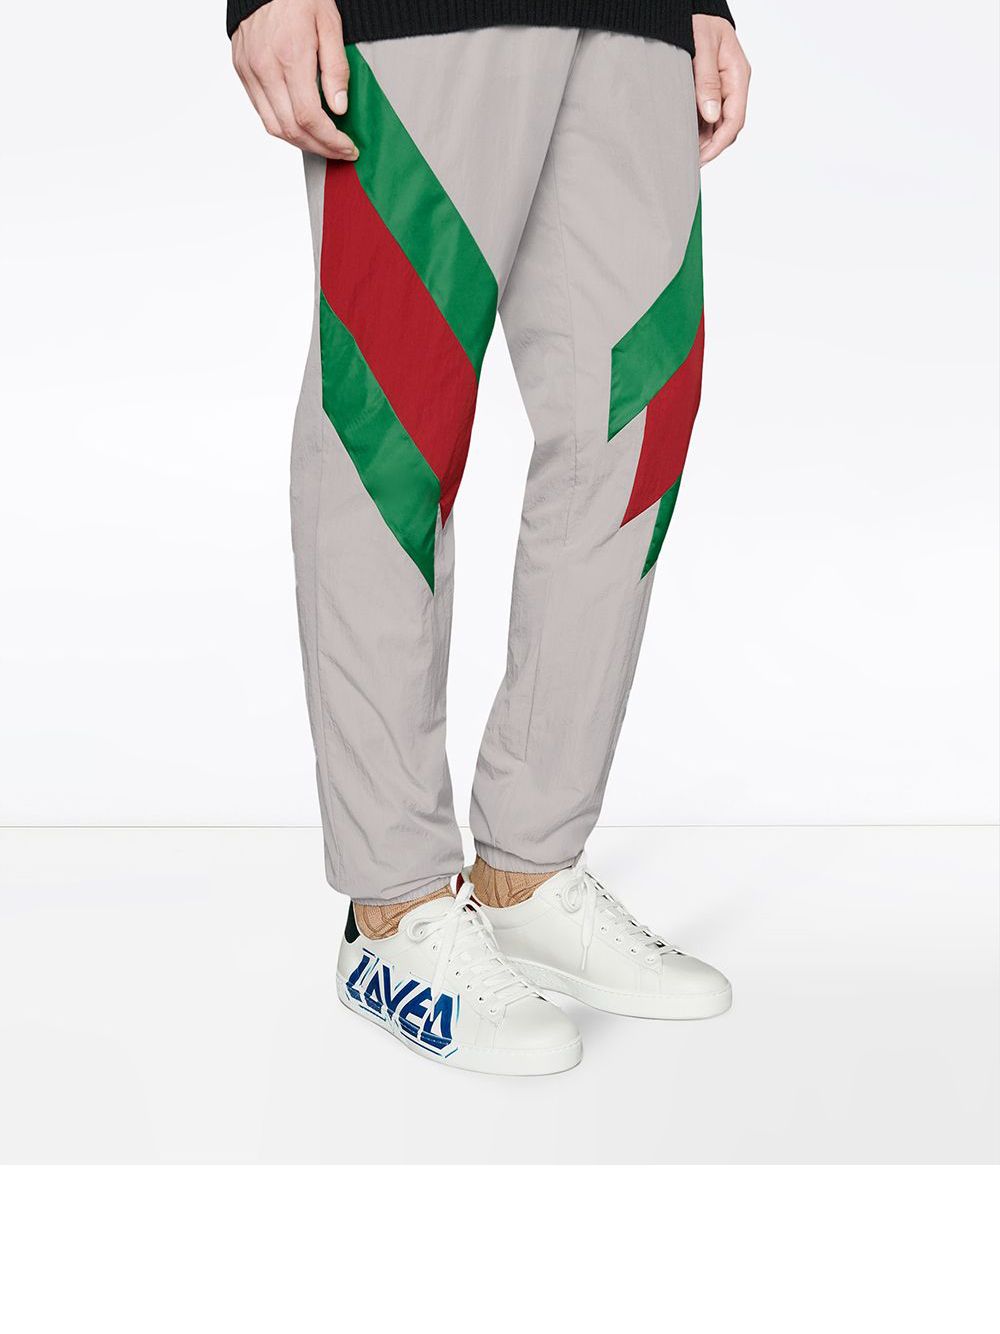 Gucci Ace Sneaker With Loved Print, $790, farfetch.com